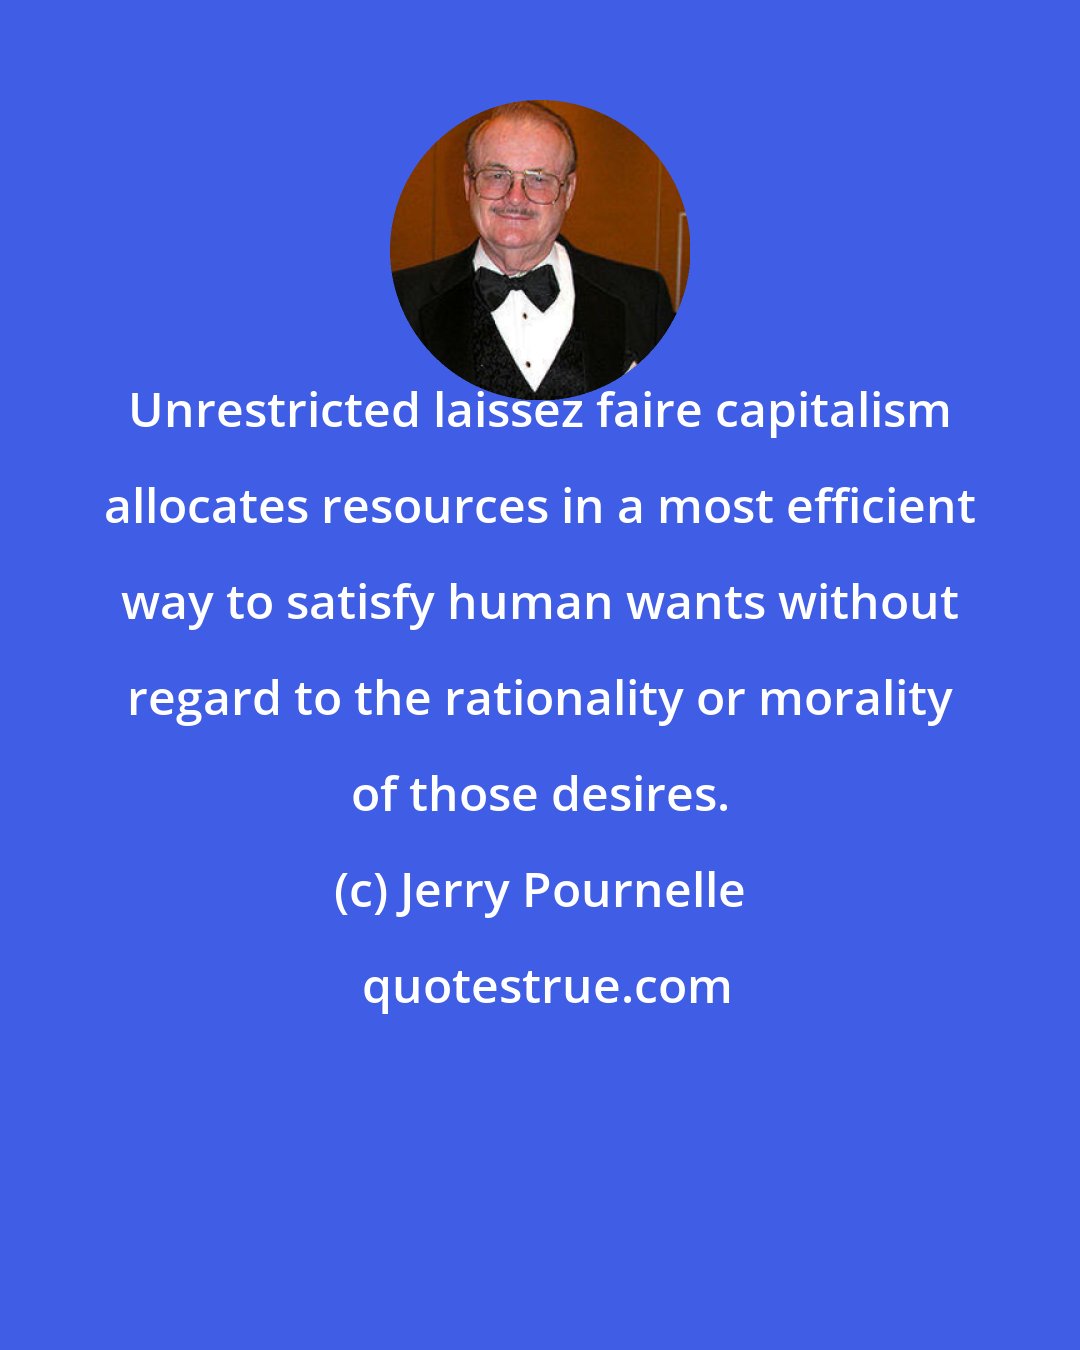 Jerry Pournelle: Unrestricted laissez faire capitalism allocates resources in a most efficient way to satisfy human wants without regard to the rationality or morality of those desires.